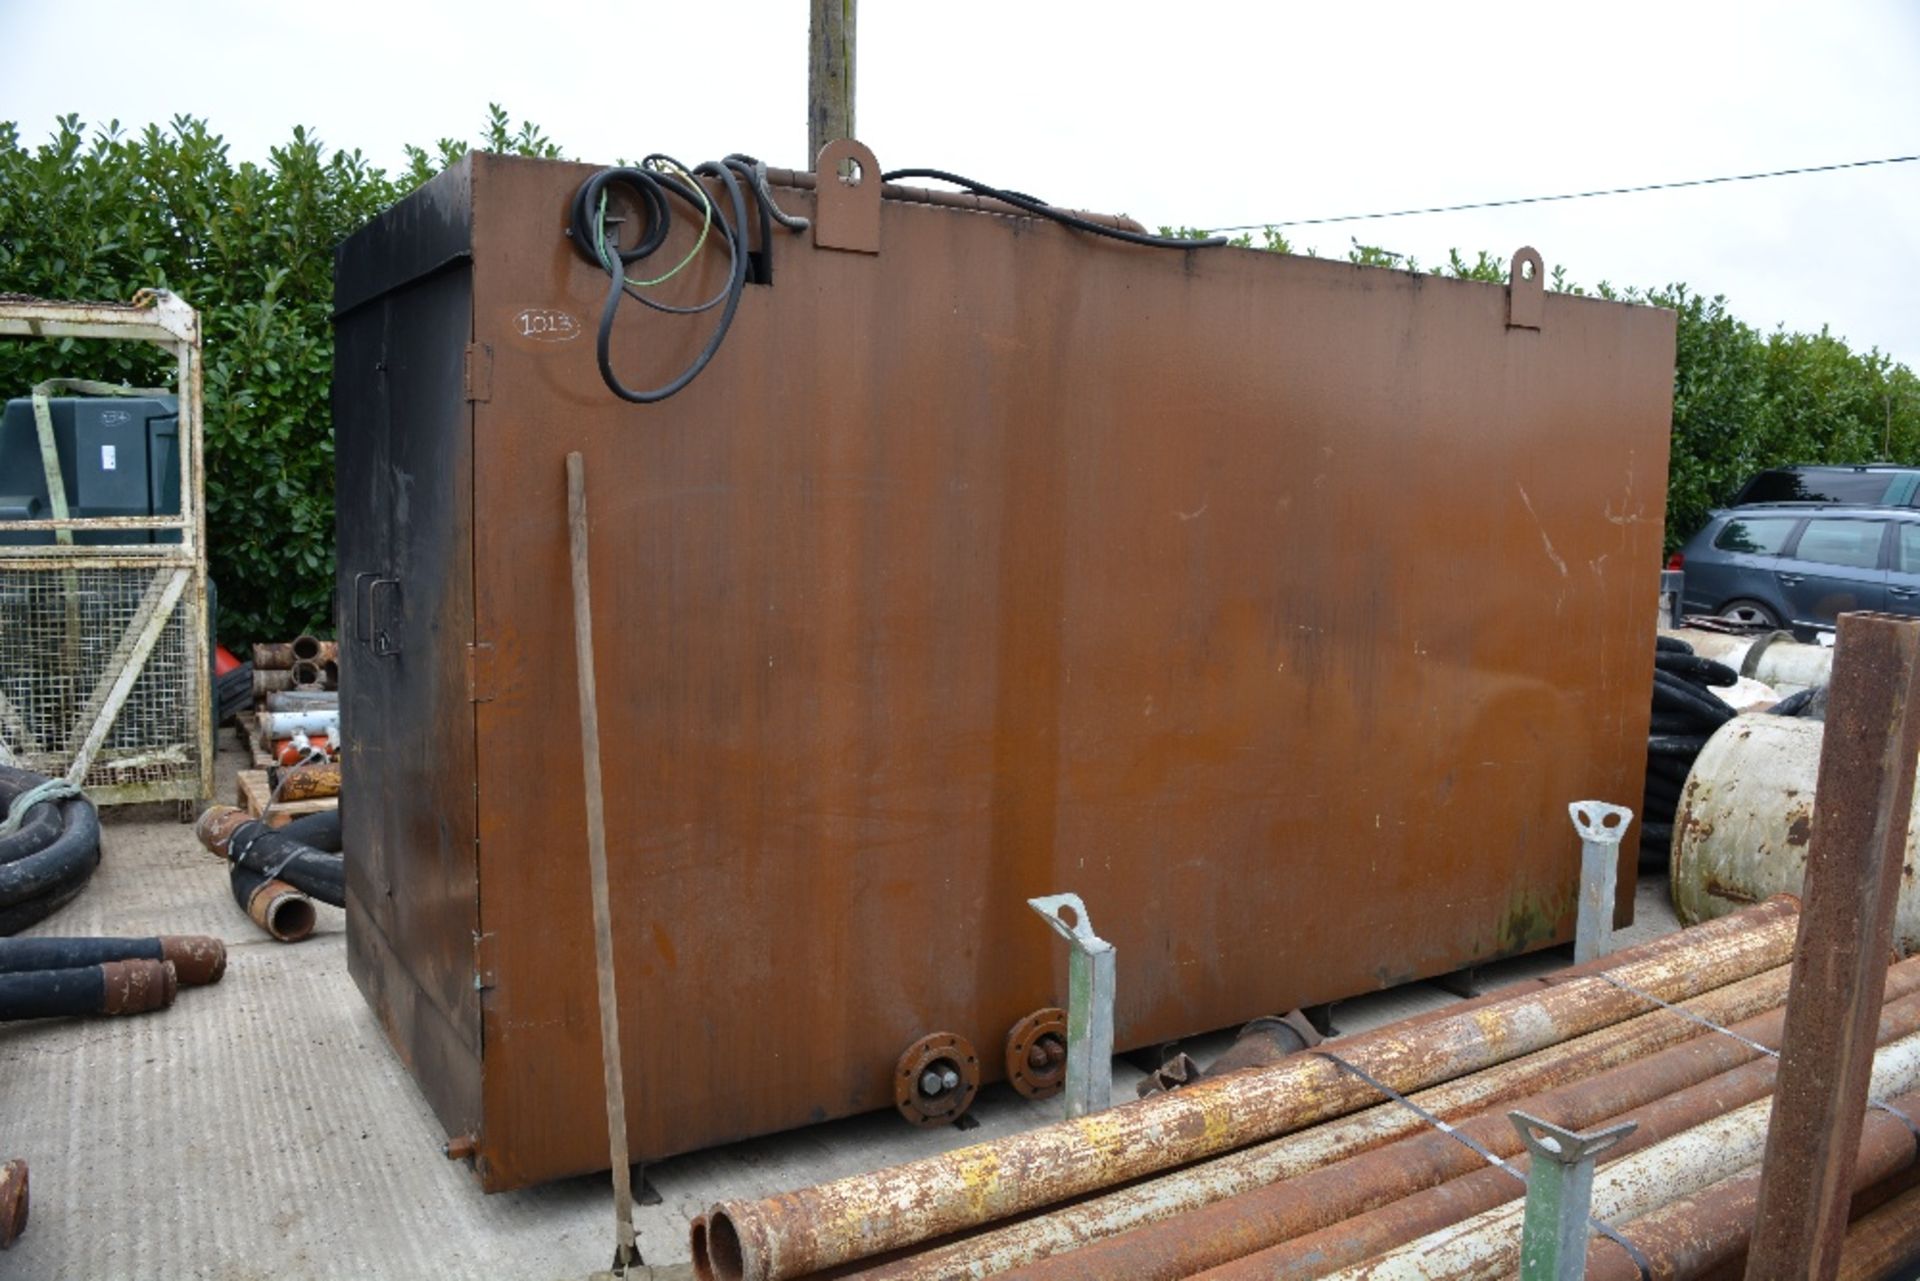 5,570 LITRE BUNDED DIESEL TANK (YEAR 2015), C/W 230V PUMP, BEEN USED FOR RED DIESEL, ID: PL-15633,